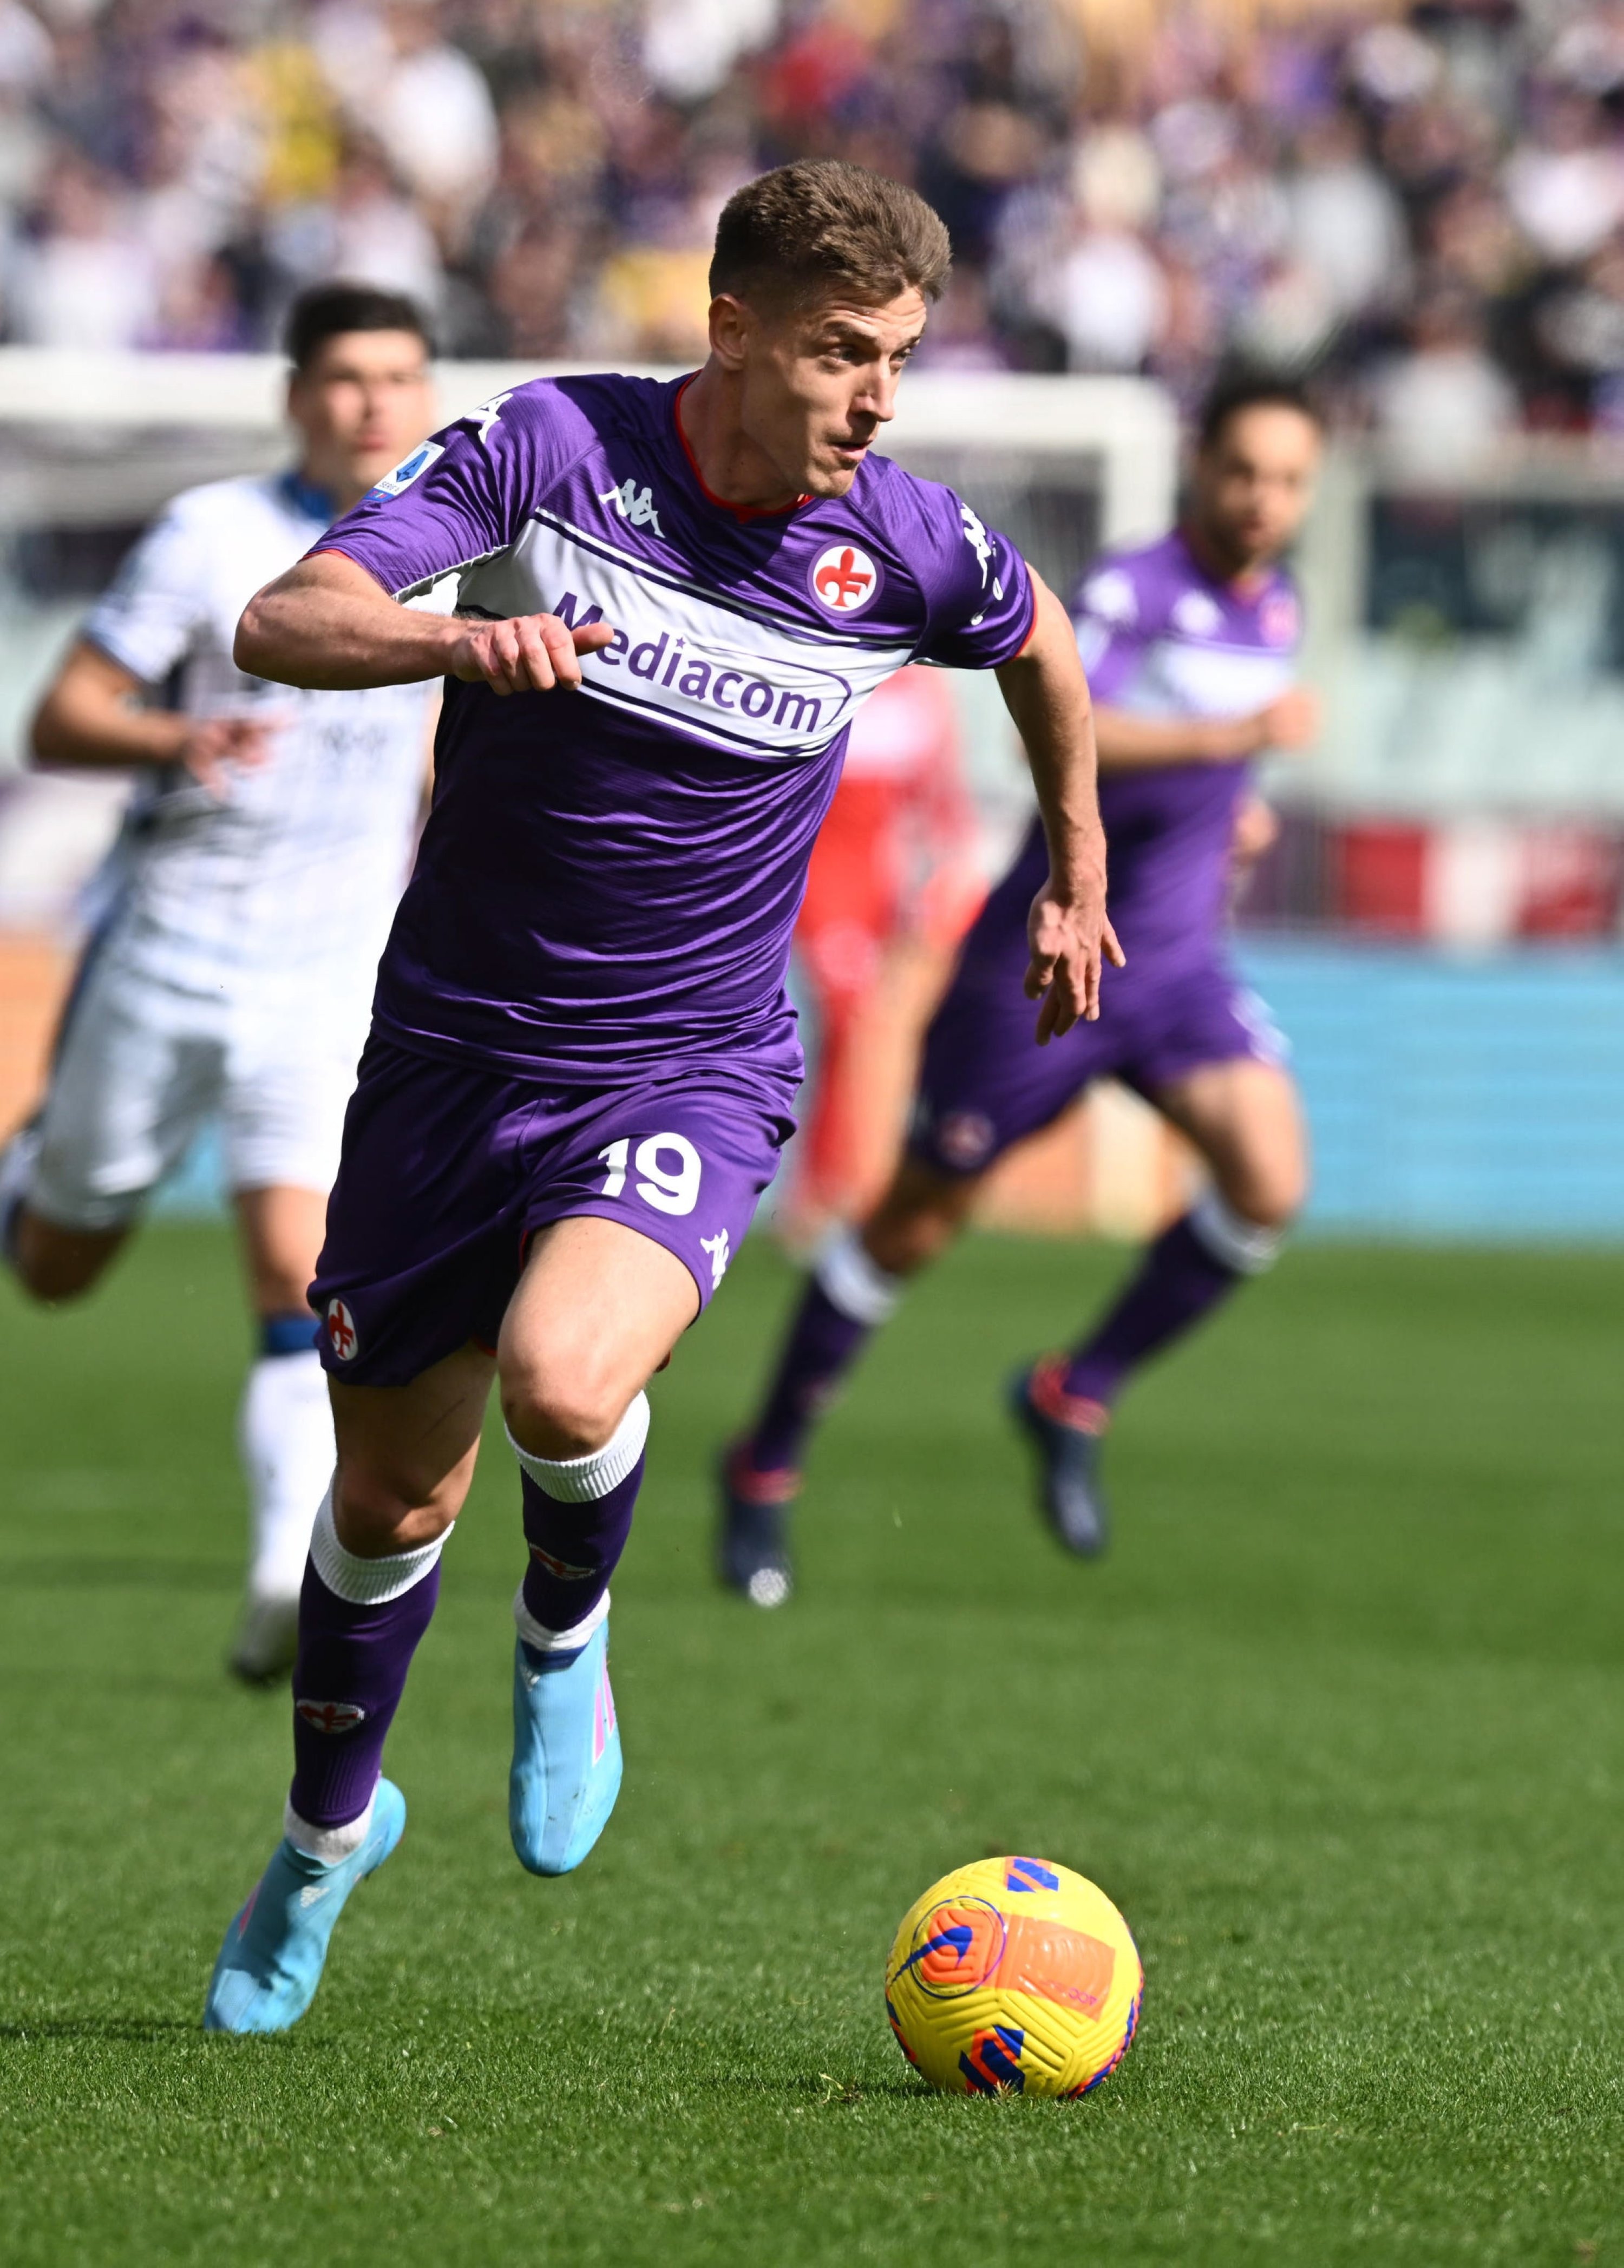 Fiorentina's Krzysztof Piatek in action during a Serie A match against Atalanta, Florence, Italy, Feb. 20, 2022. (EPA Photo)